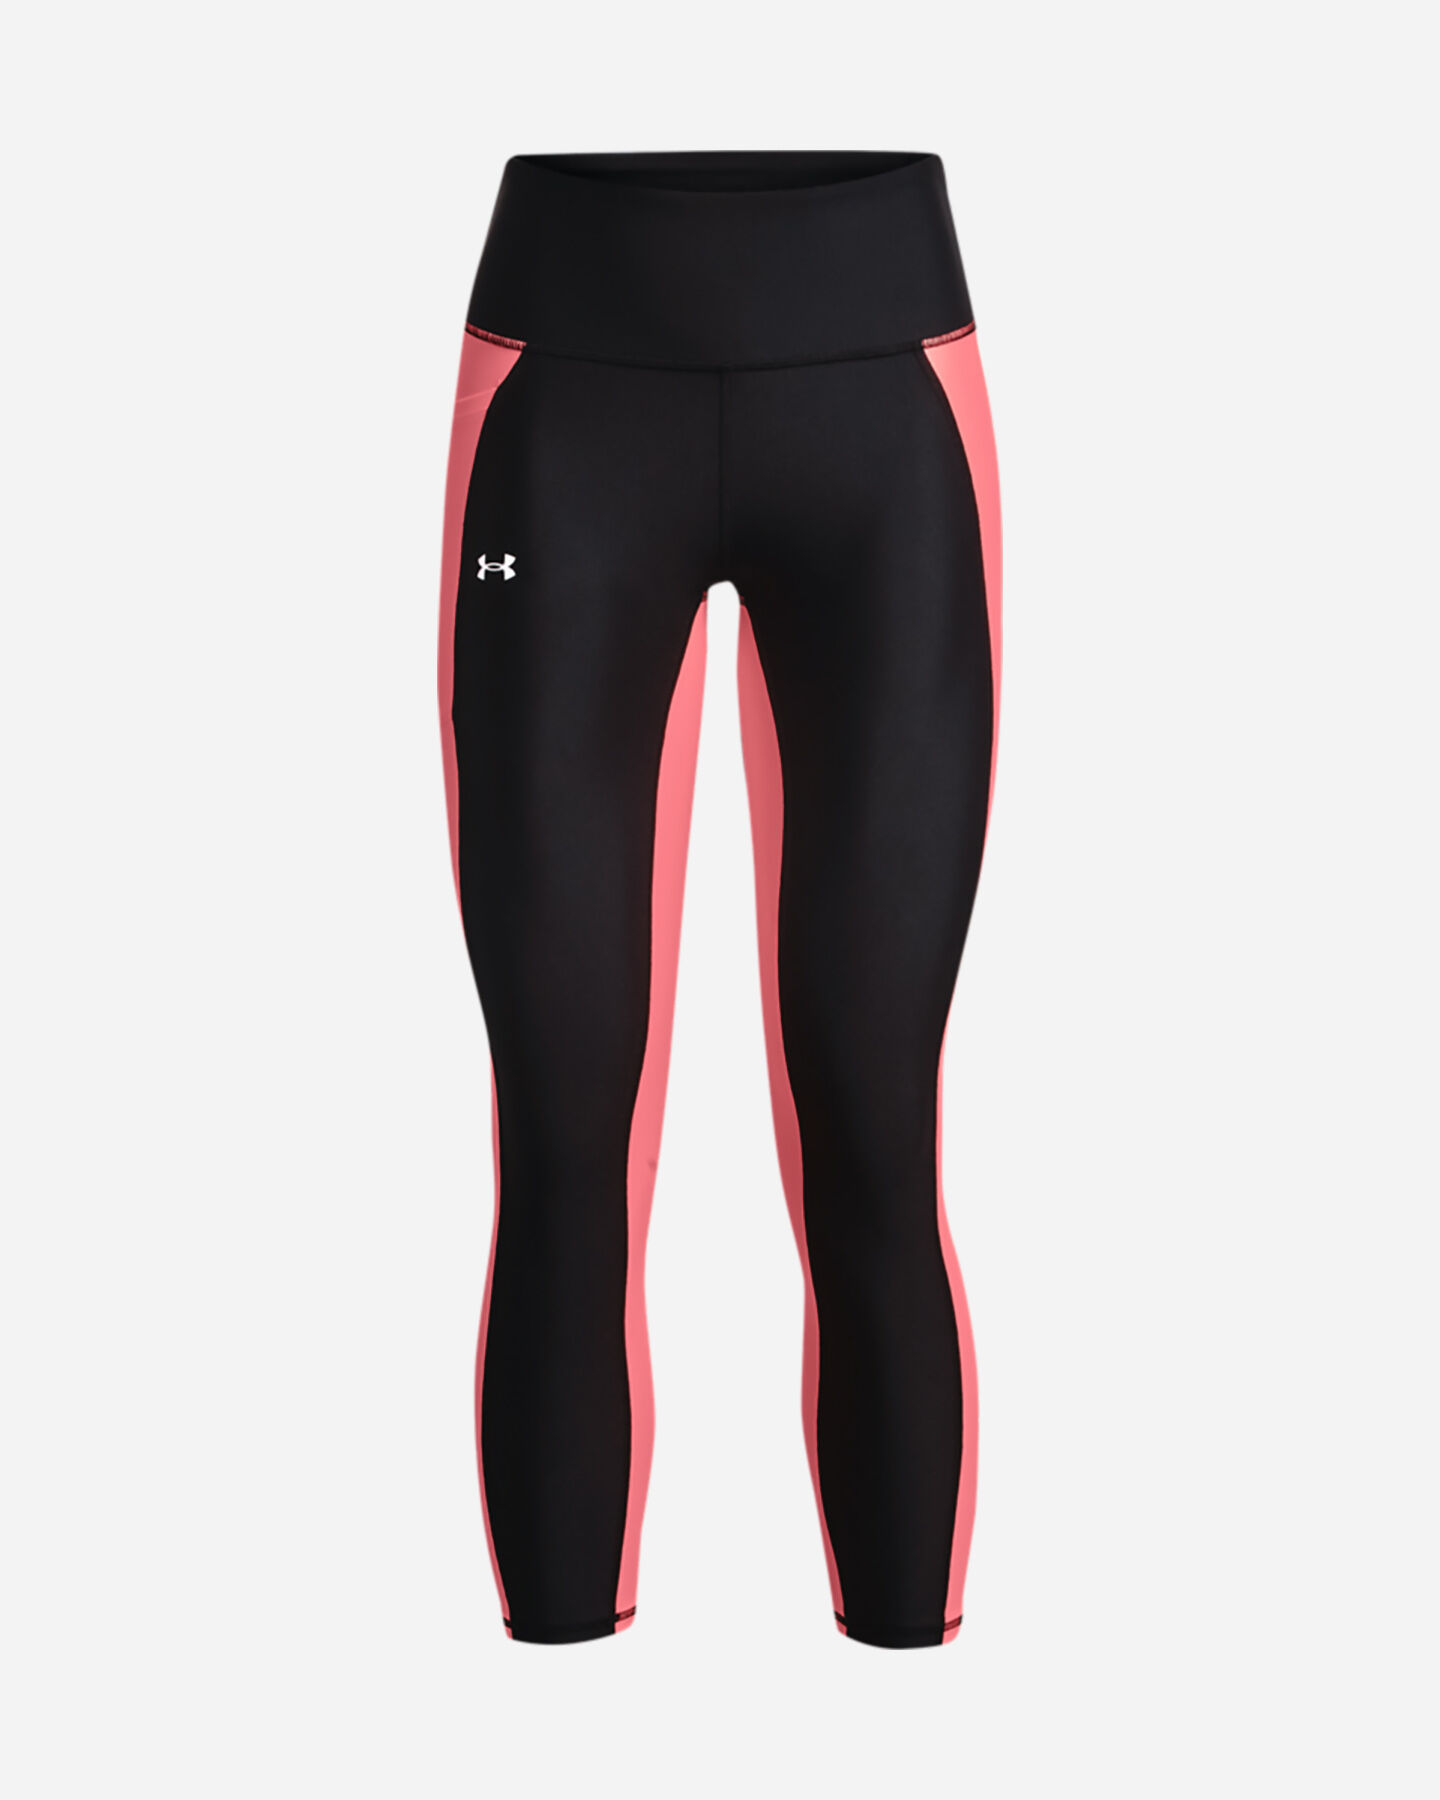  Leggings UNDER ARMOUR LATERAL INSERT 7/8 W S5336860|0001|XS scatto 0